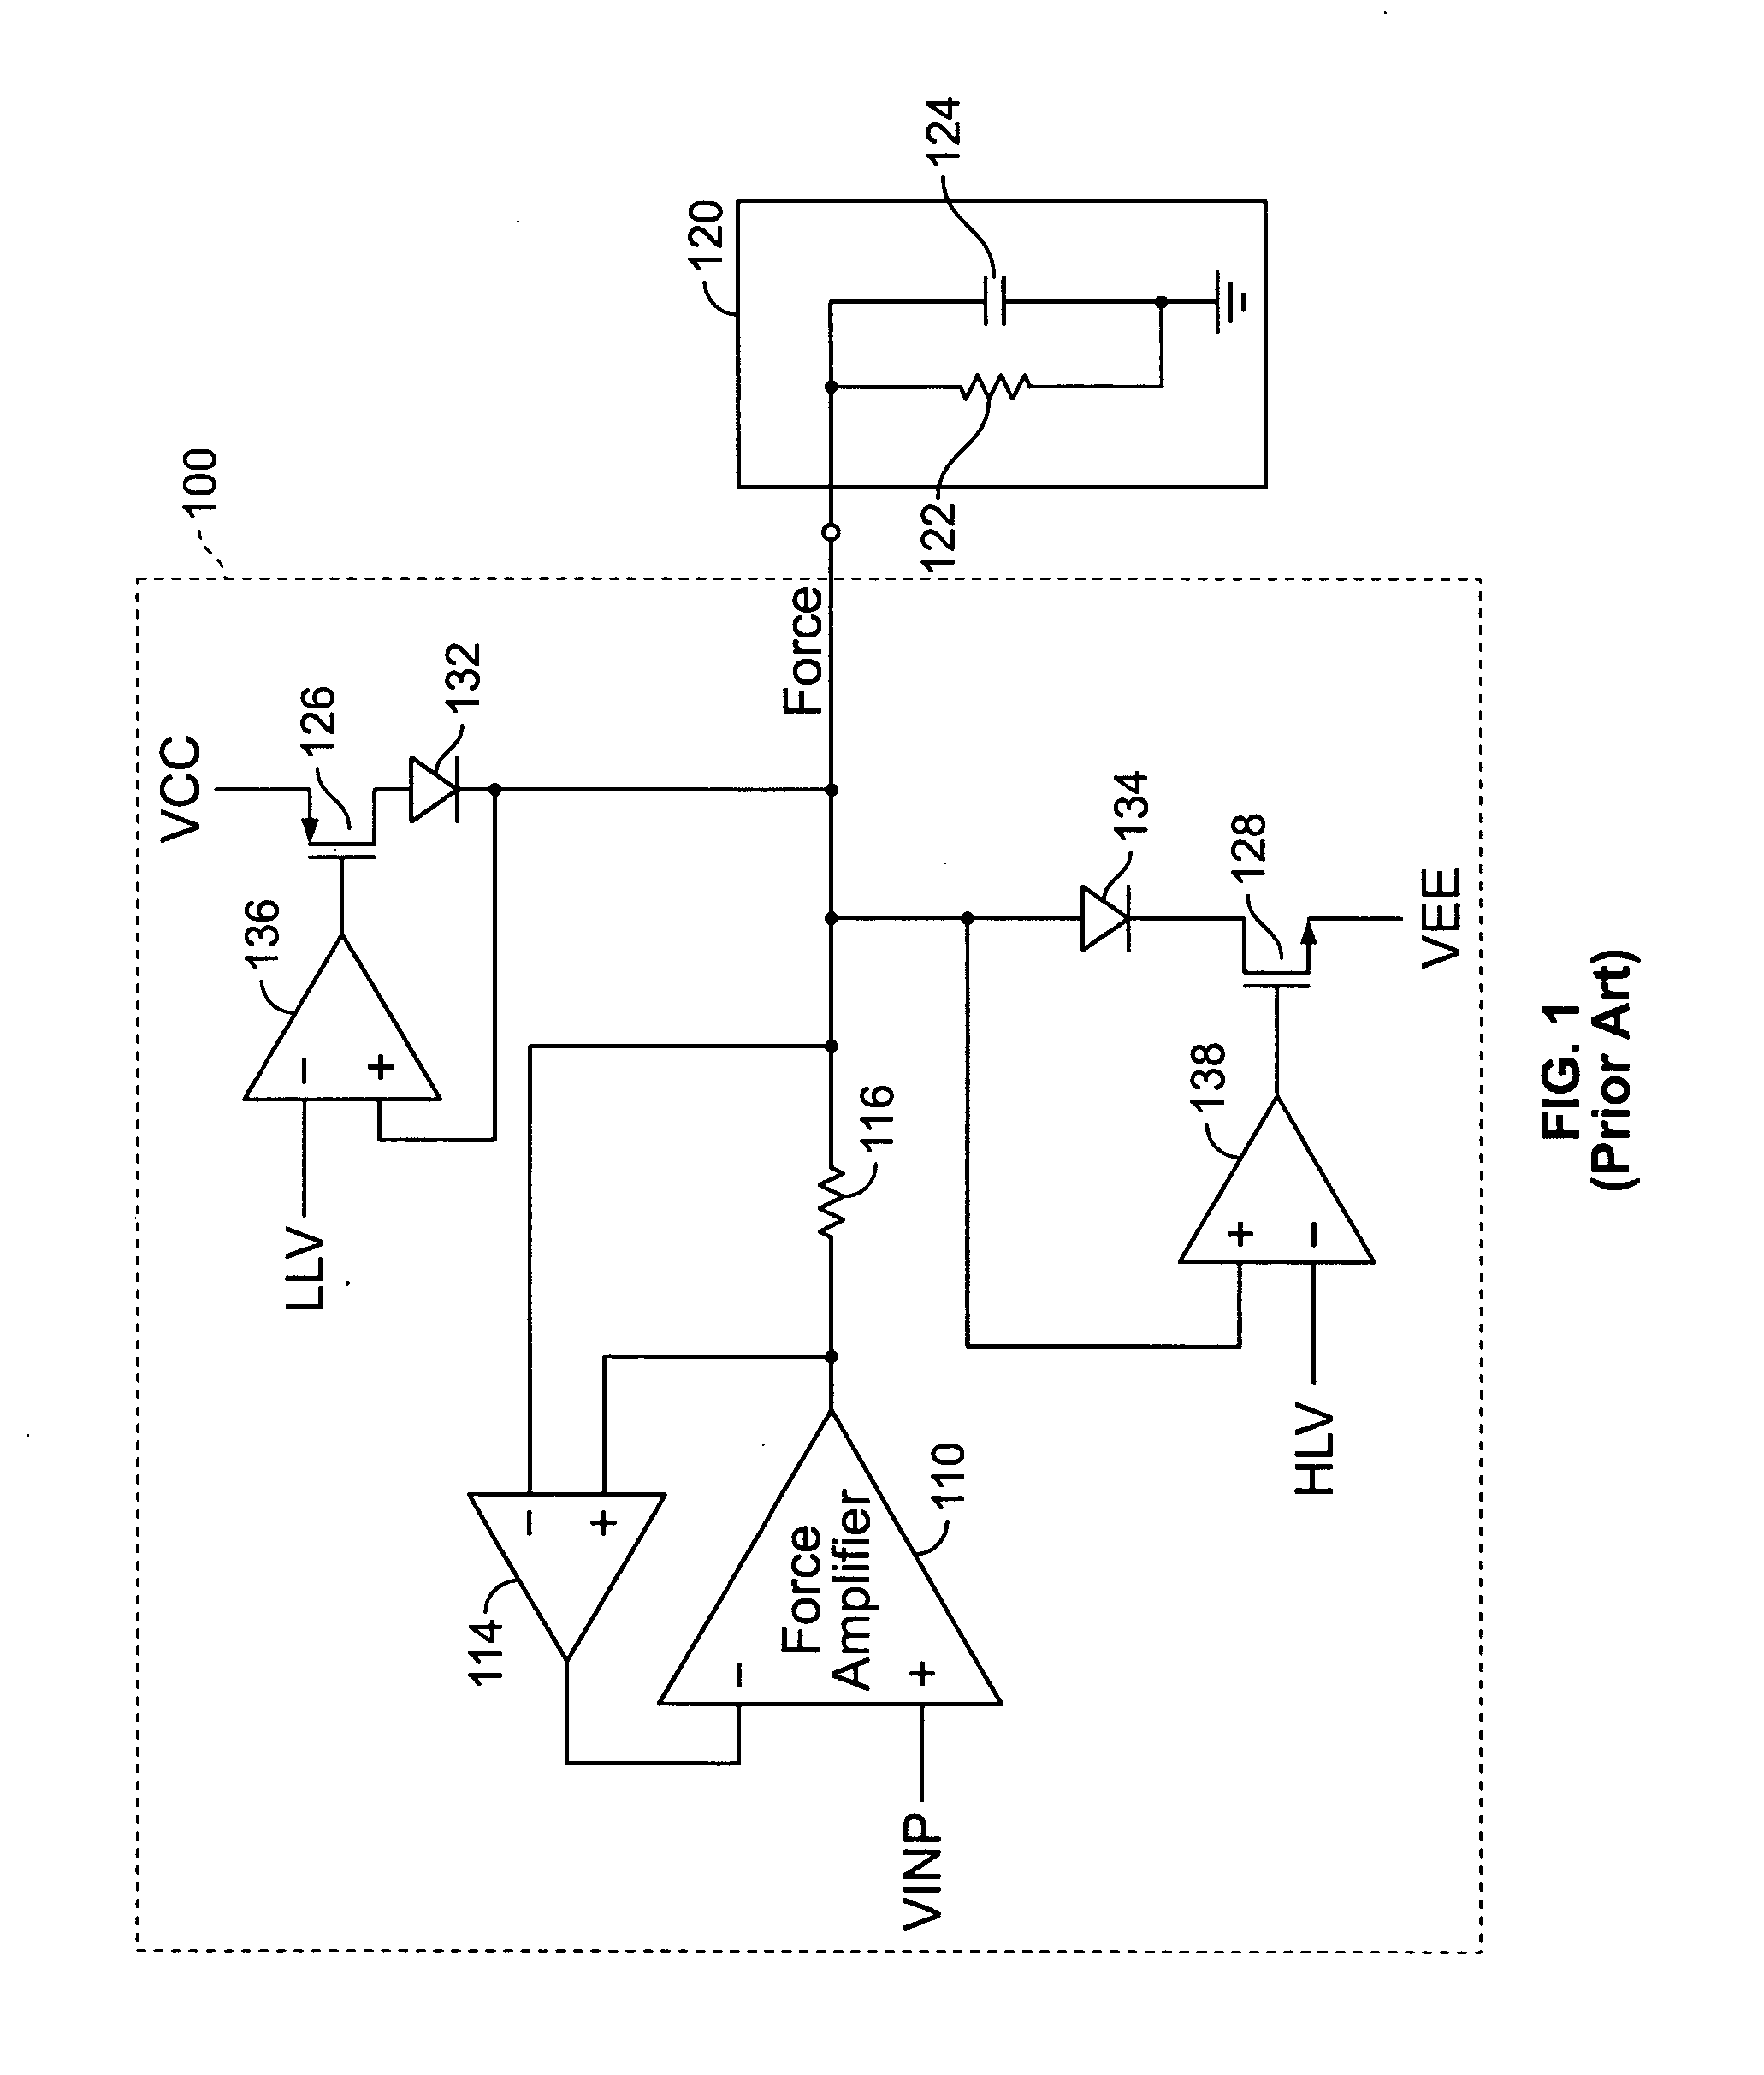 Precision measurement unit having voltage and/or current clamp power down upon setting reversal